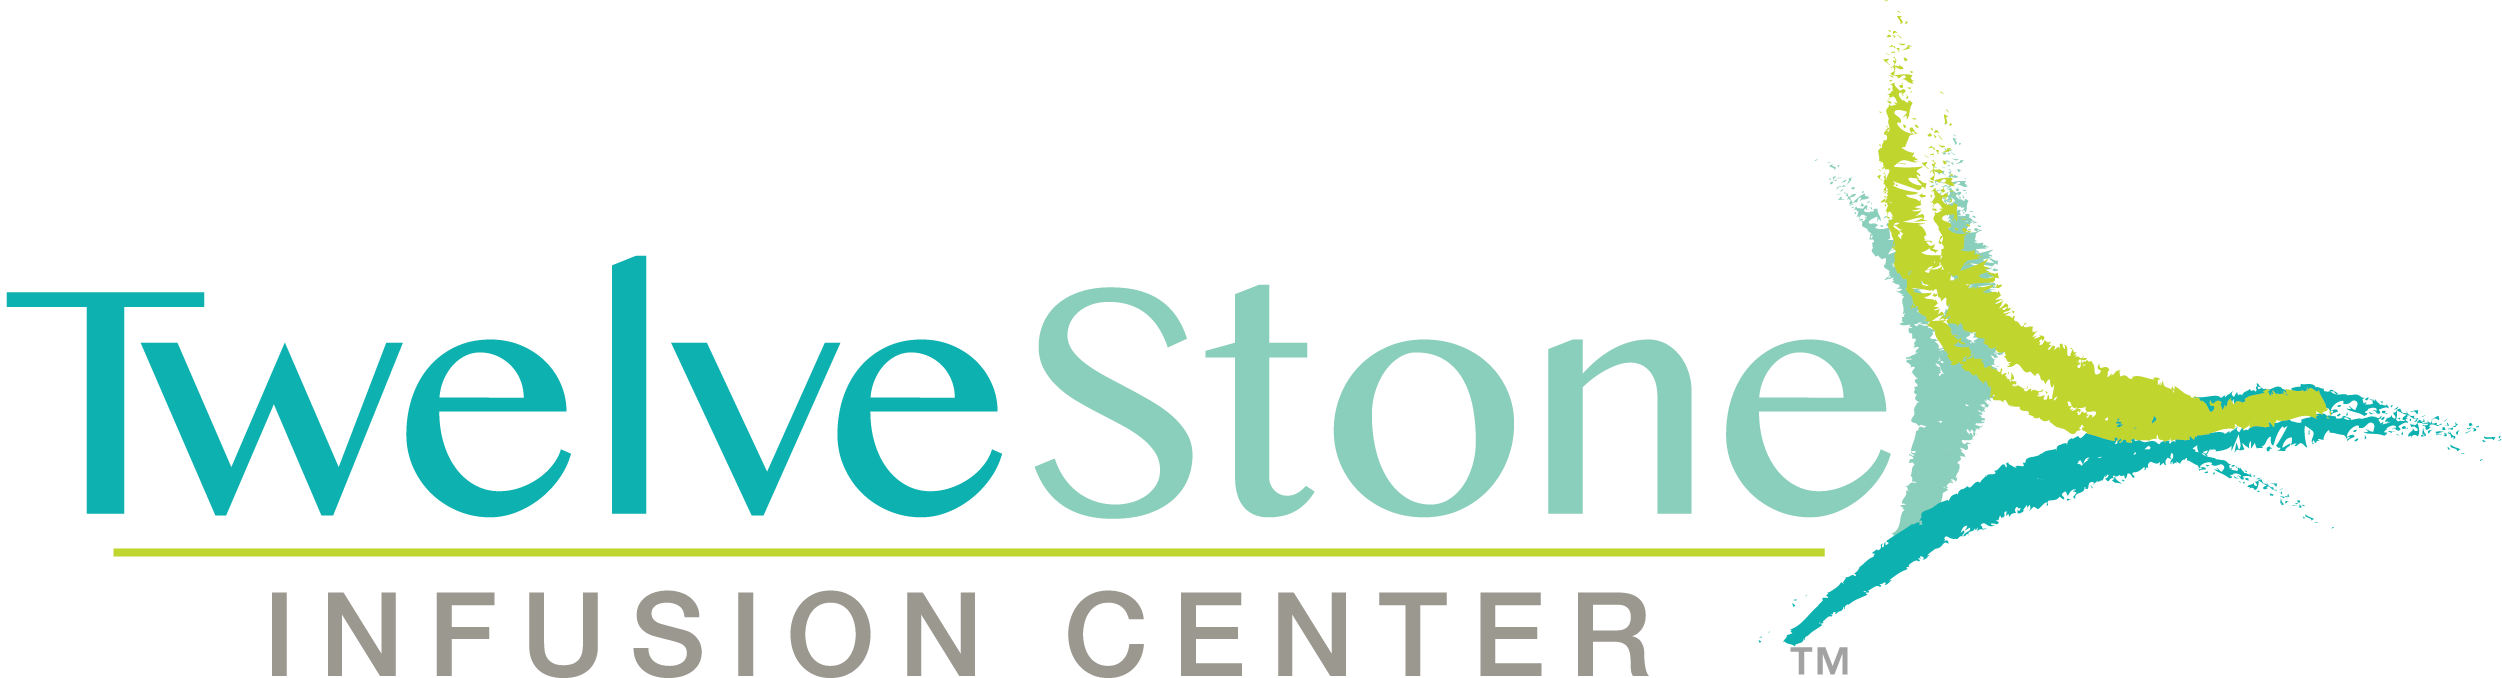 Loudoun Chamber Hosts Grand Opening Ribbon Cutting for TwelveStone Infusion Center Dulles